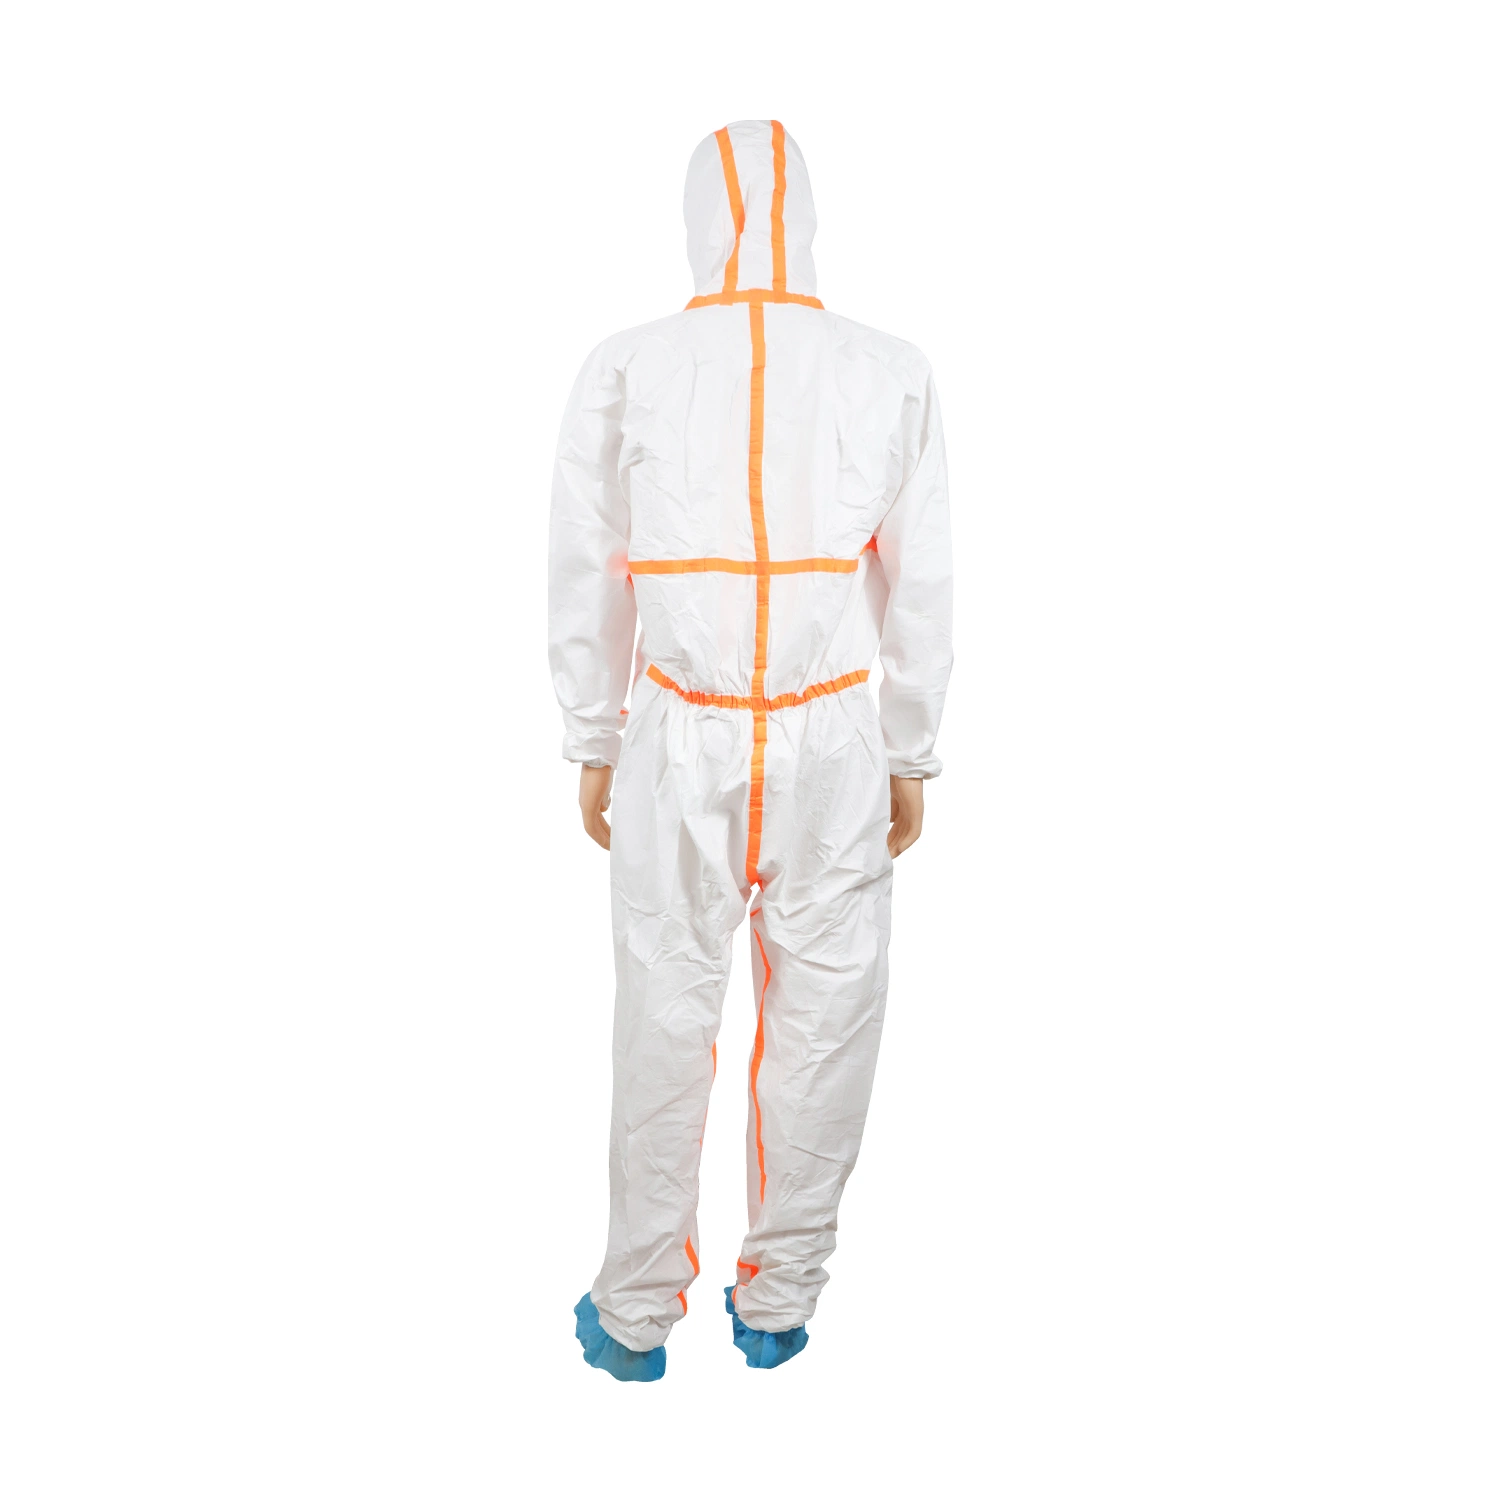 White Disposable Medicalcoveralls Protective Surgicaloveralls Hospitallab Chemical Protetive Suit Clothing